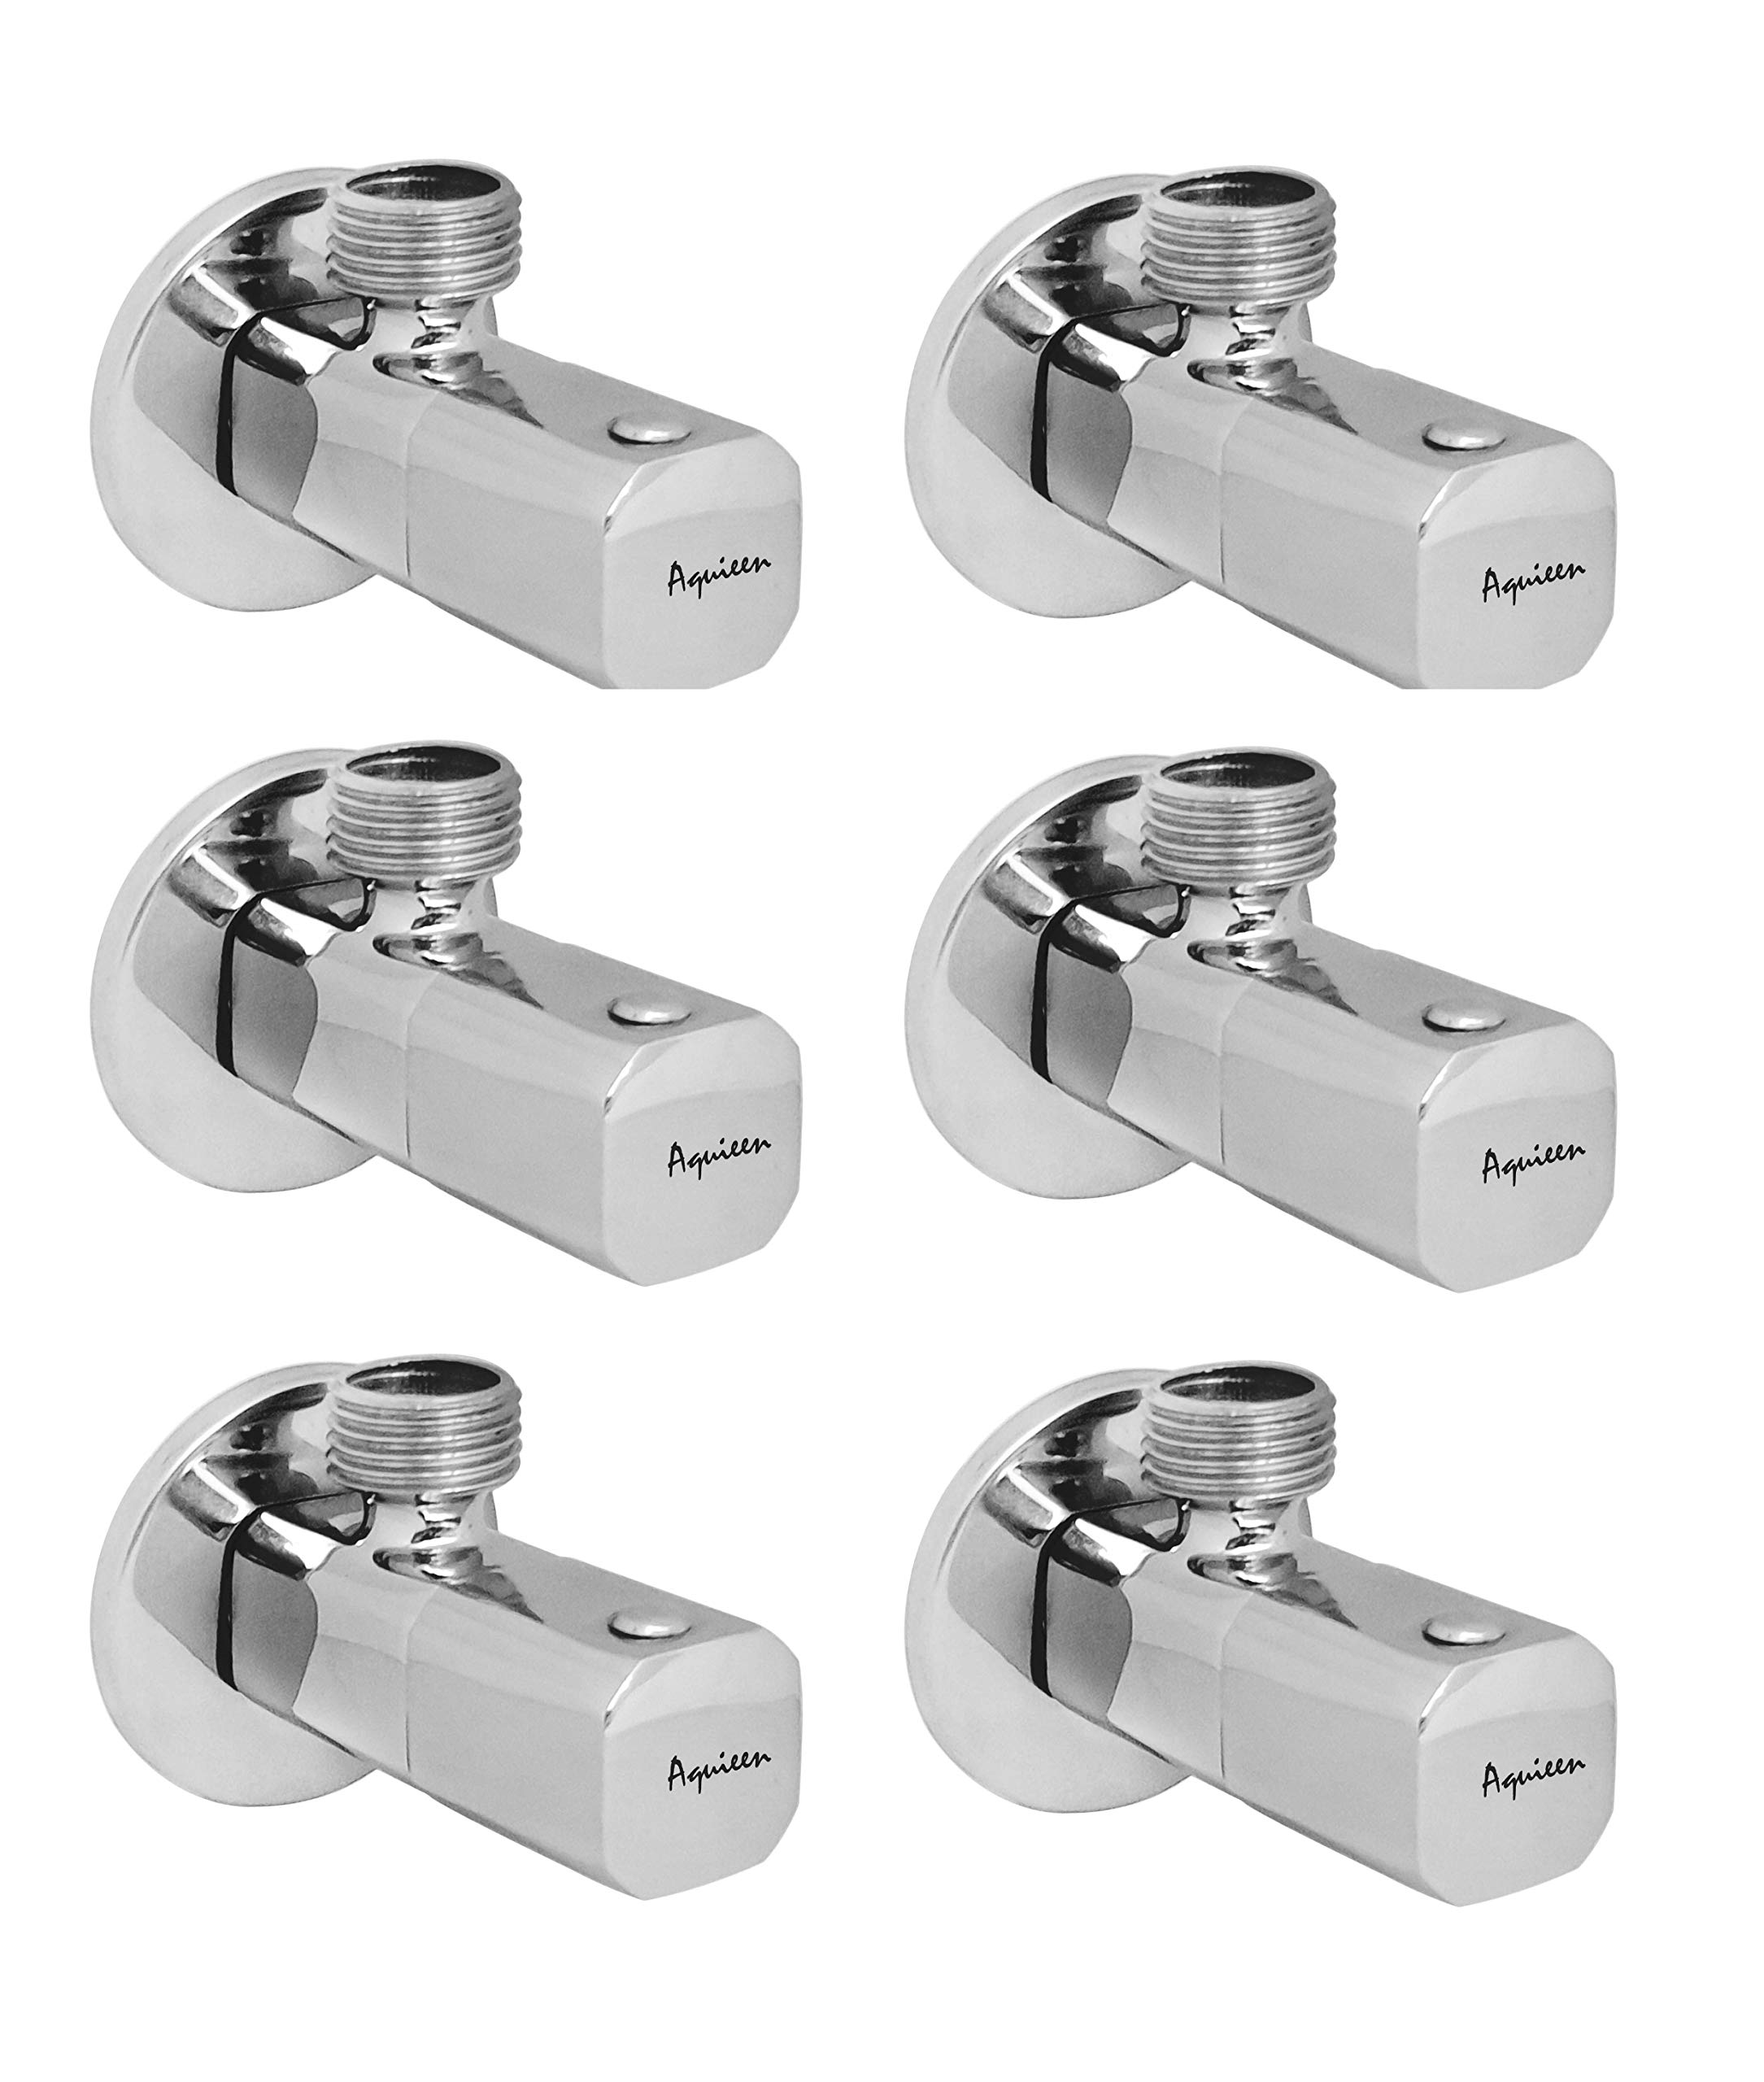 Aquieen Blanco Brass Angle Valve With Wall Flange (Pack Of 6)